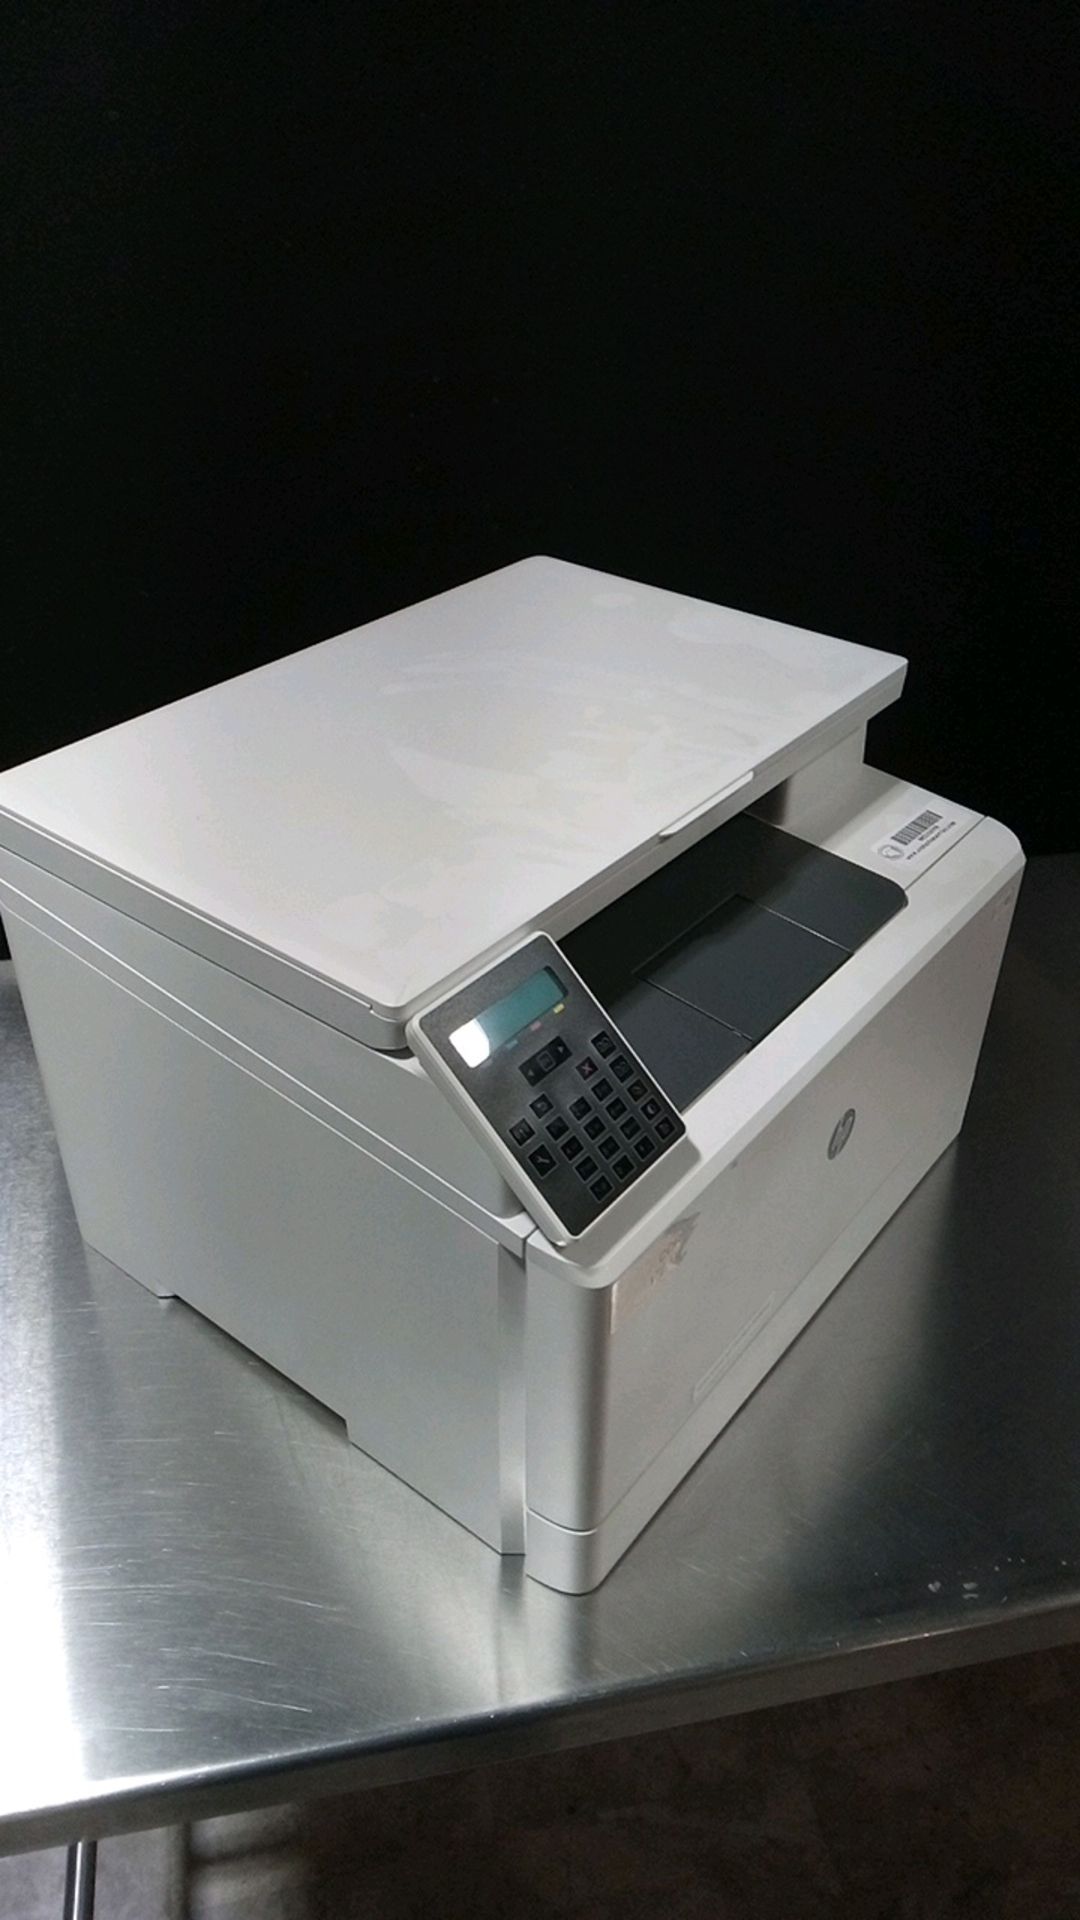 HP M180NW PRINTER LOCATED AT: 2440 GREENLEAF AVE, ELK GROVE VILLAGE IL - Image 2 of 2